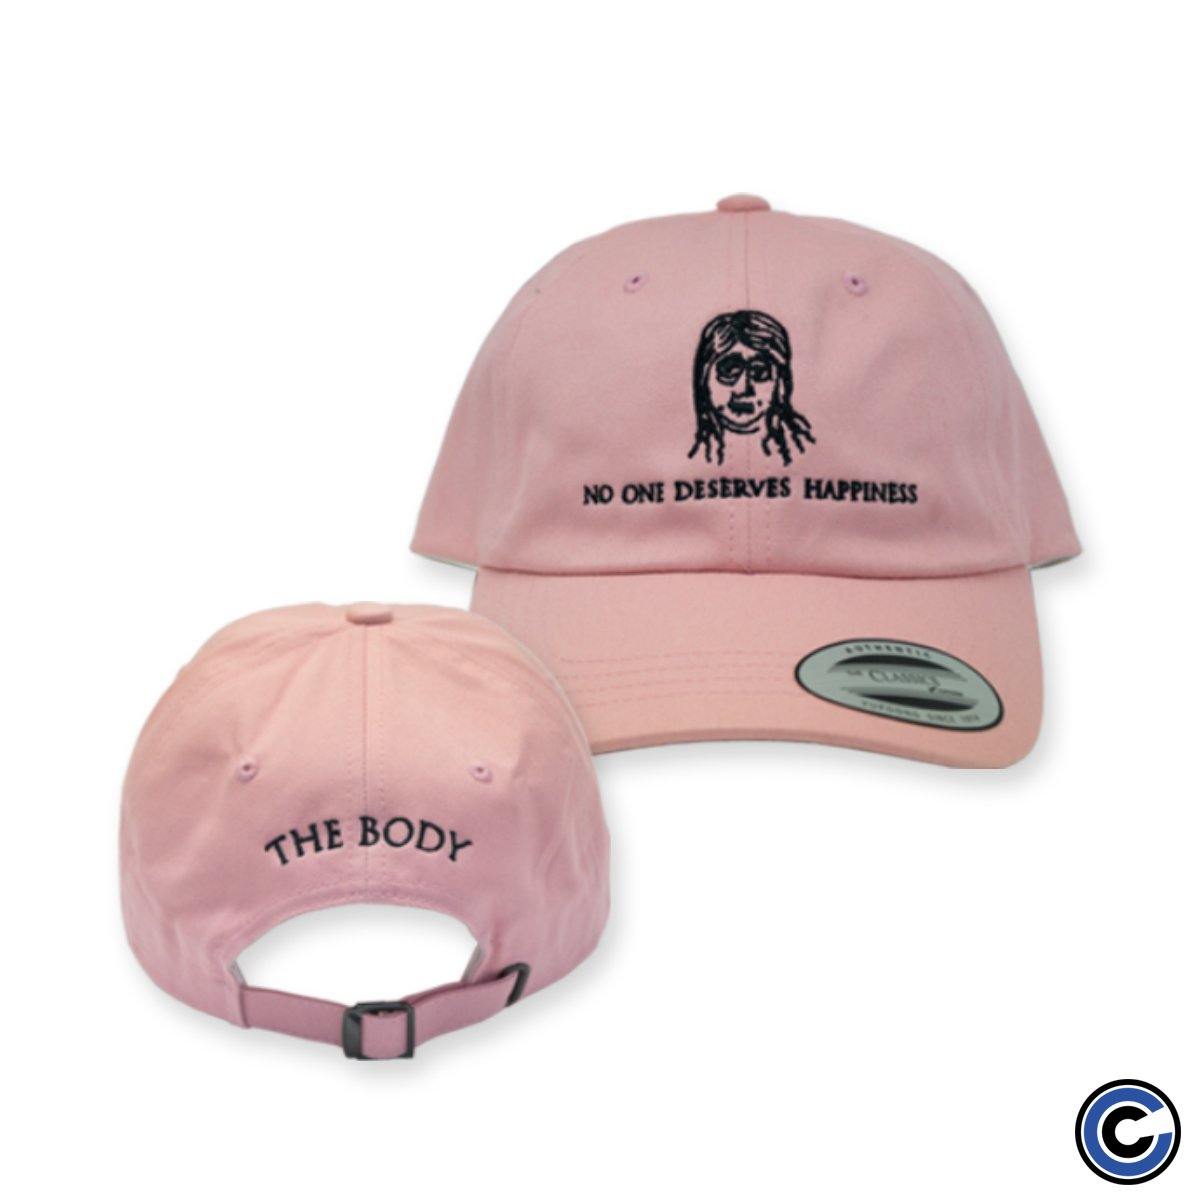 Buy – The Body "No One" Hat – Band & Music Merch – Cold Cuts Merch